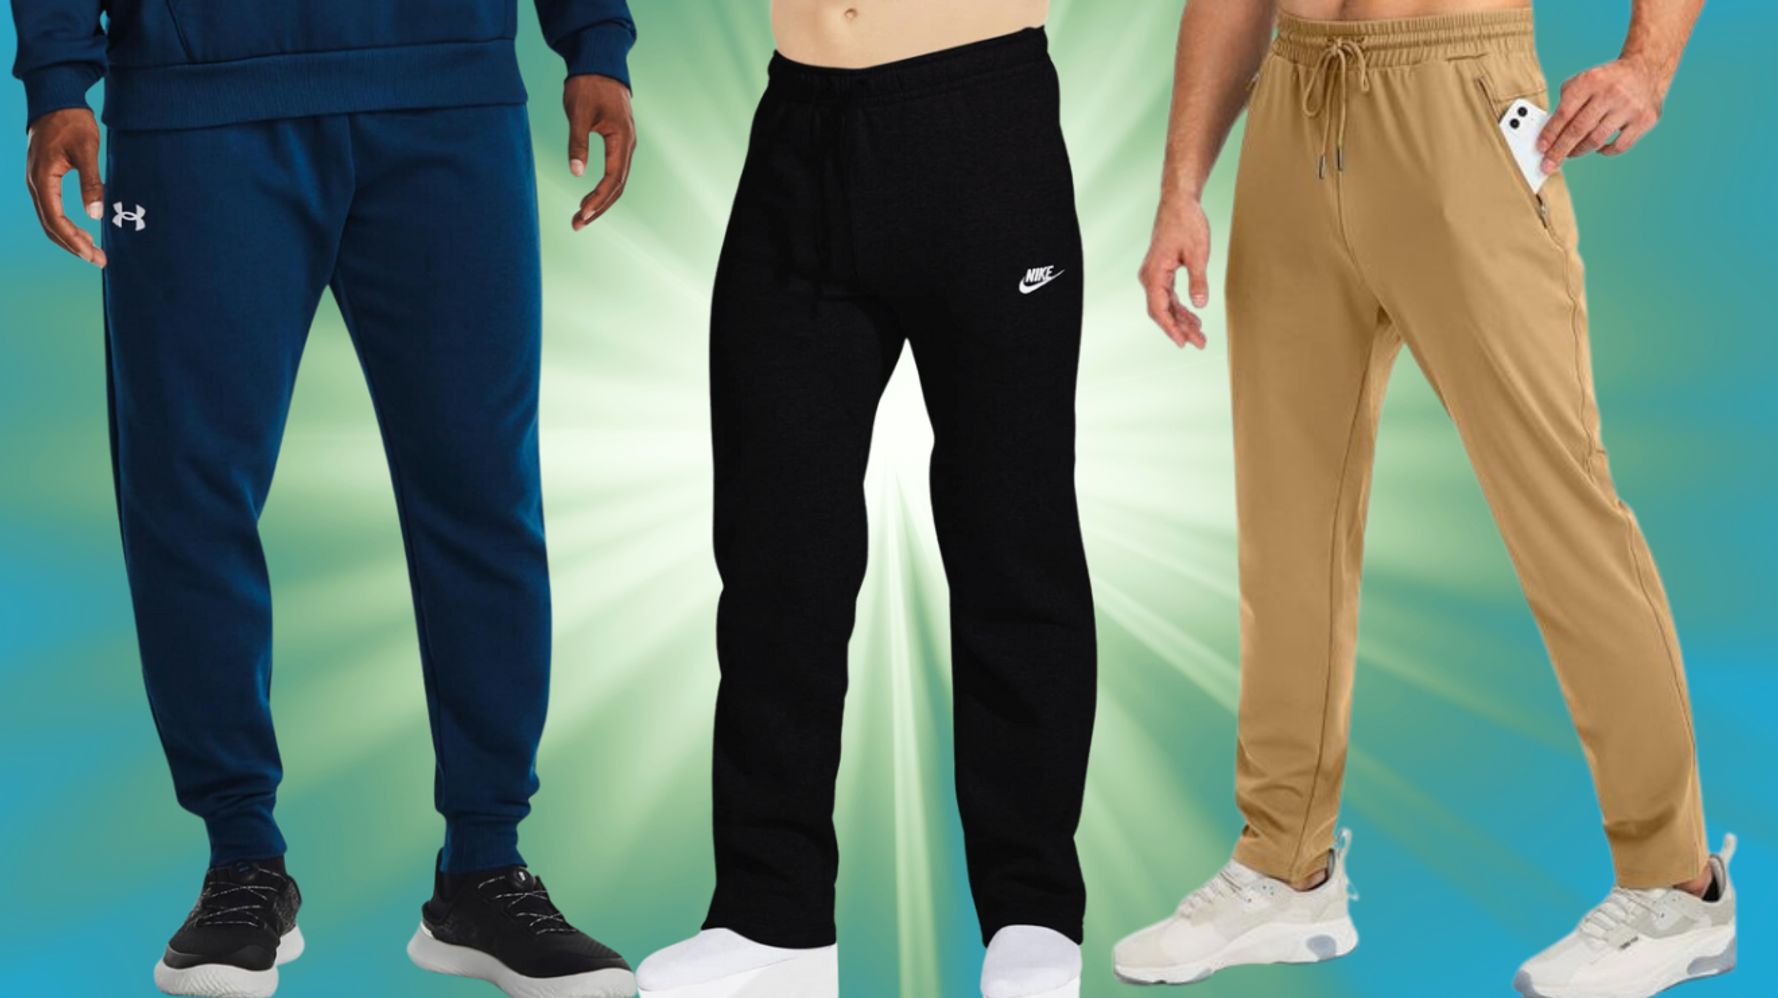  Nike Mens Fleece Tapered Club Swoosh Sweatpants Black/Silver  XX-Large : Clothing, Shoes & Jewelry